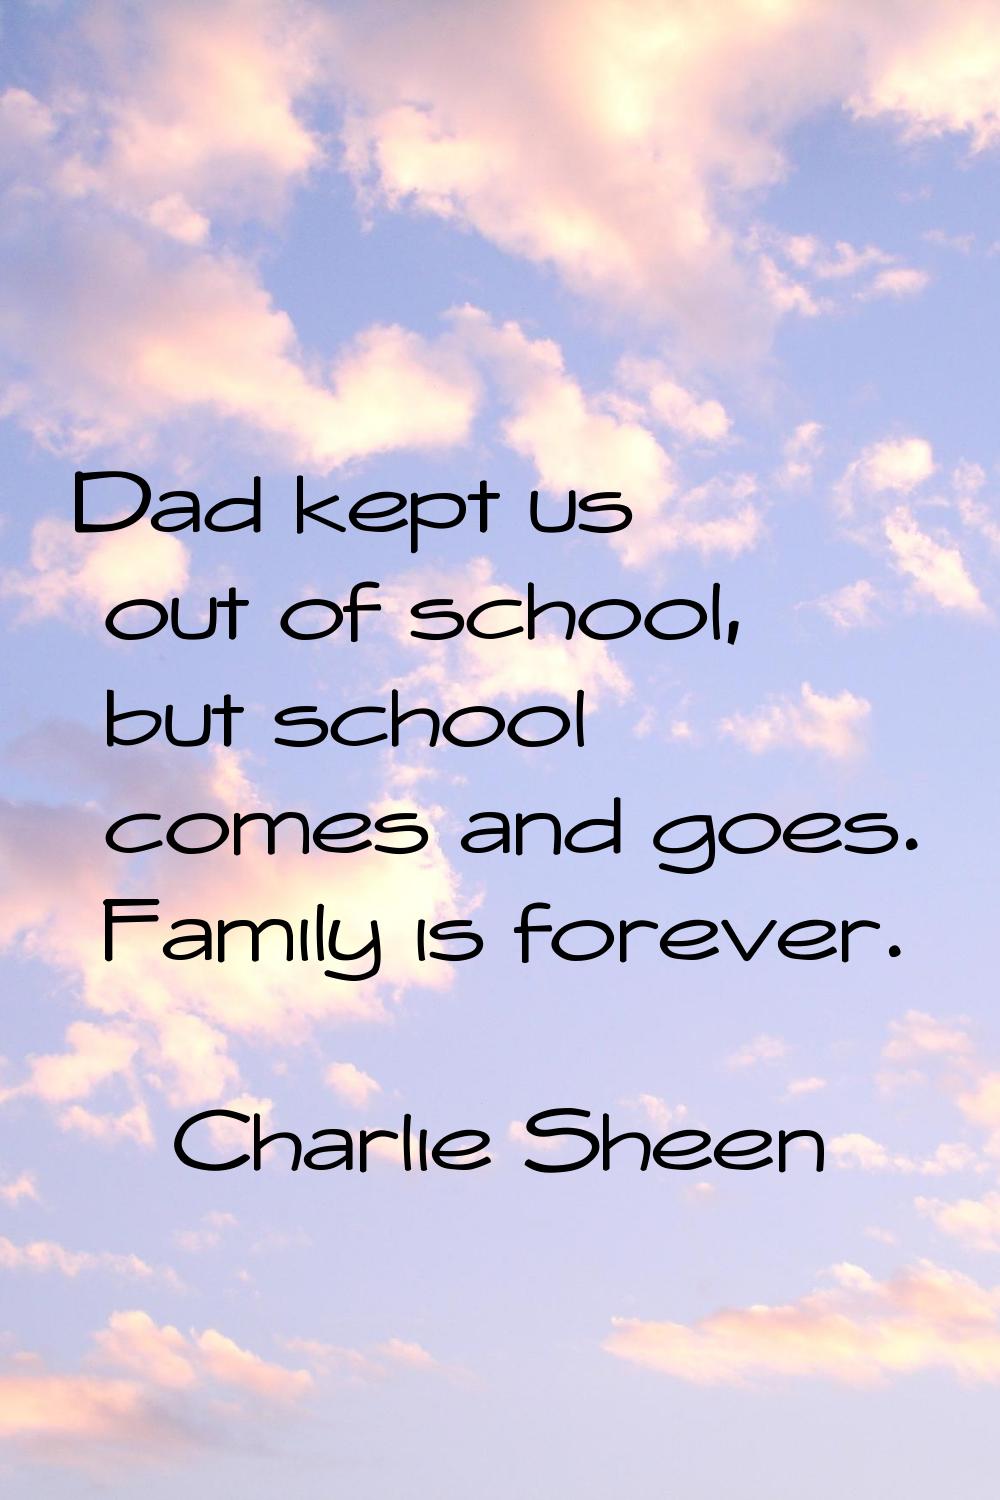 Dad kept us out of school, but school comes and goes. Family is forever.